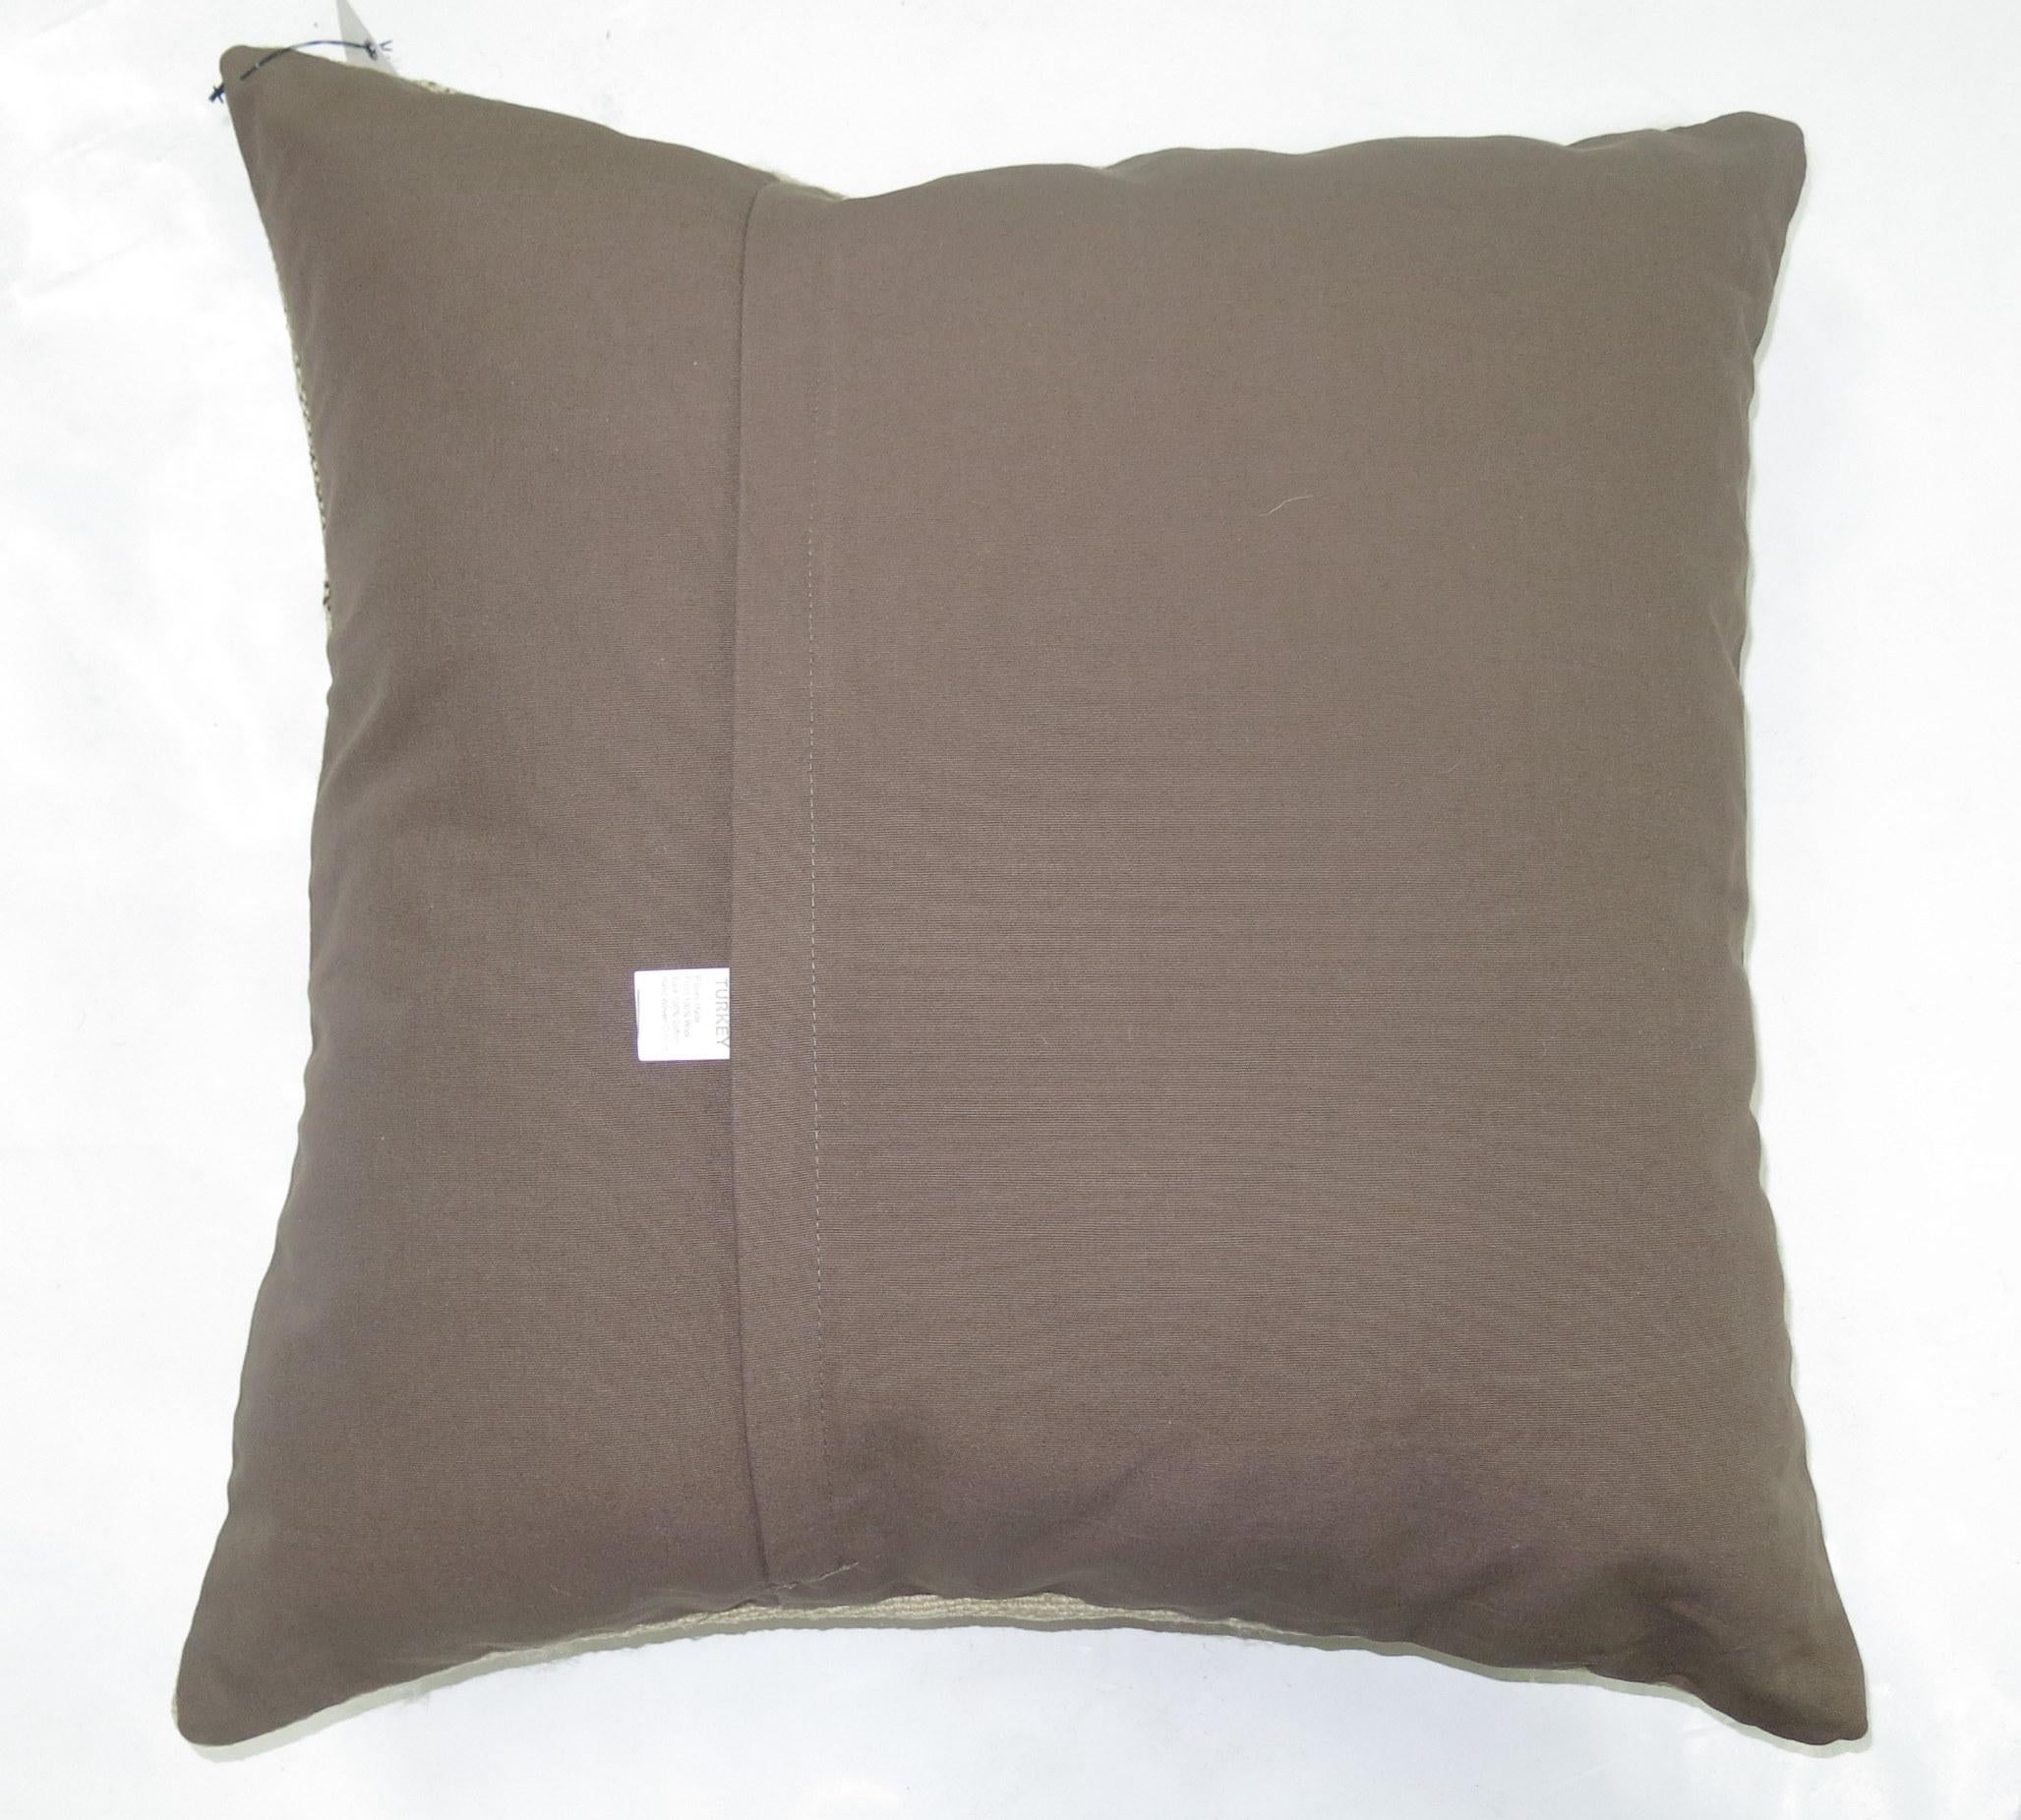 Pillow made from a Turkish Jajim flat-weave.